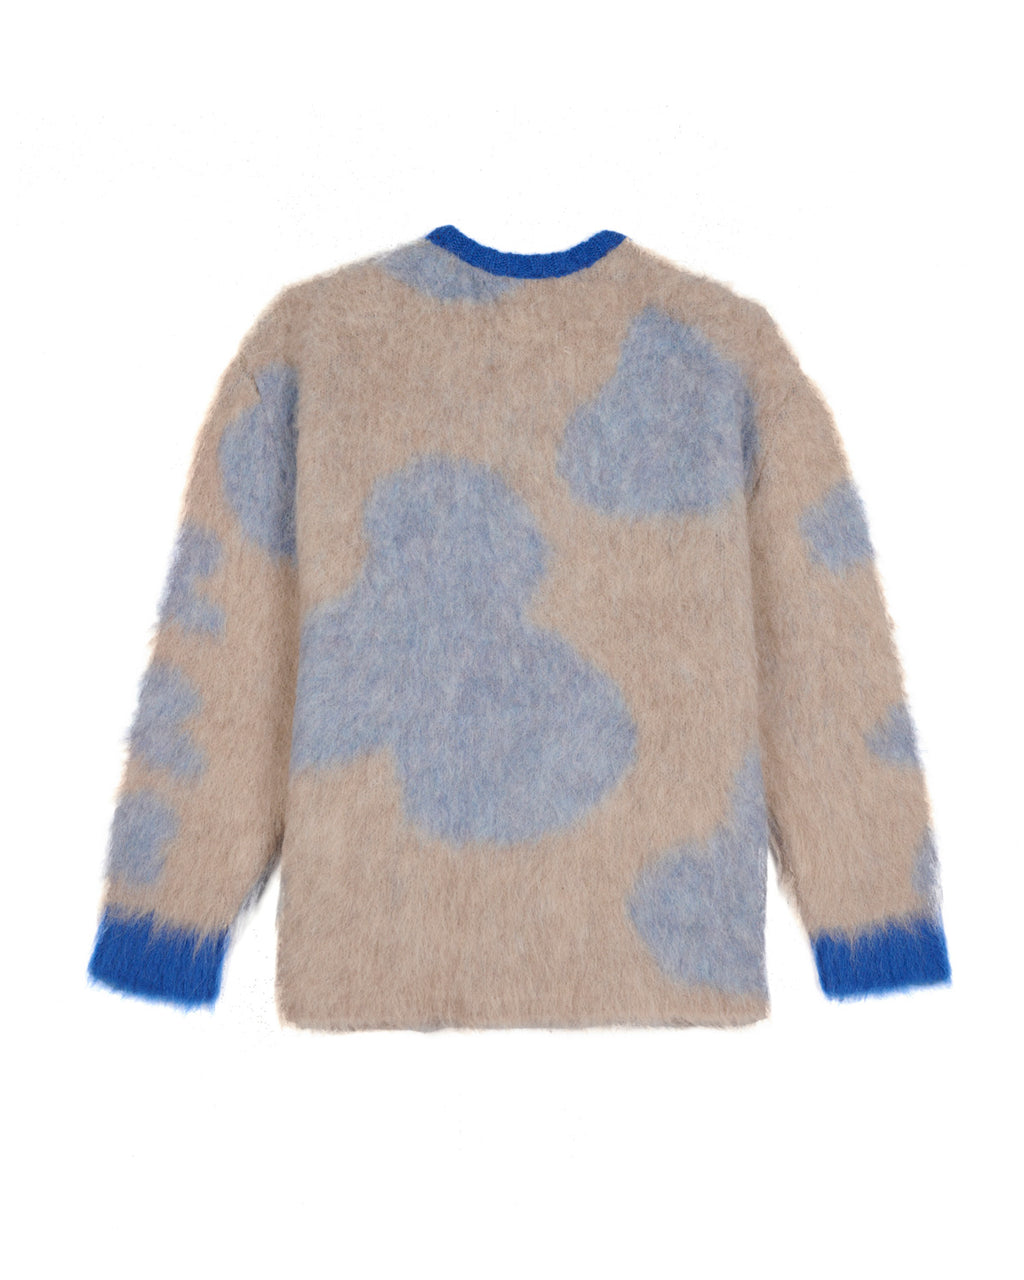 Boxy Knit Cow Print Sweater - Taupe 2